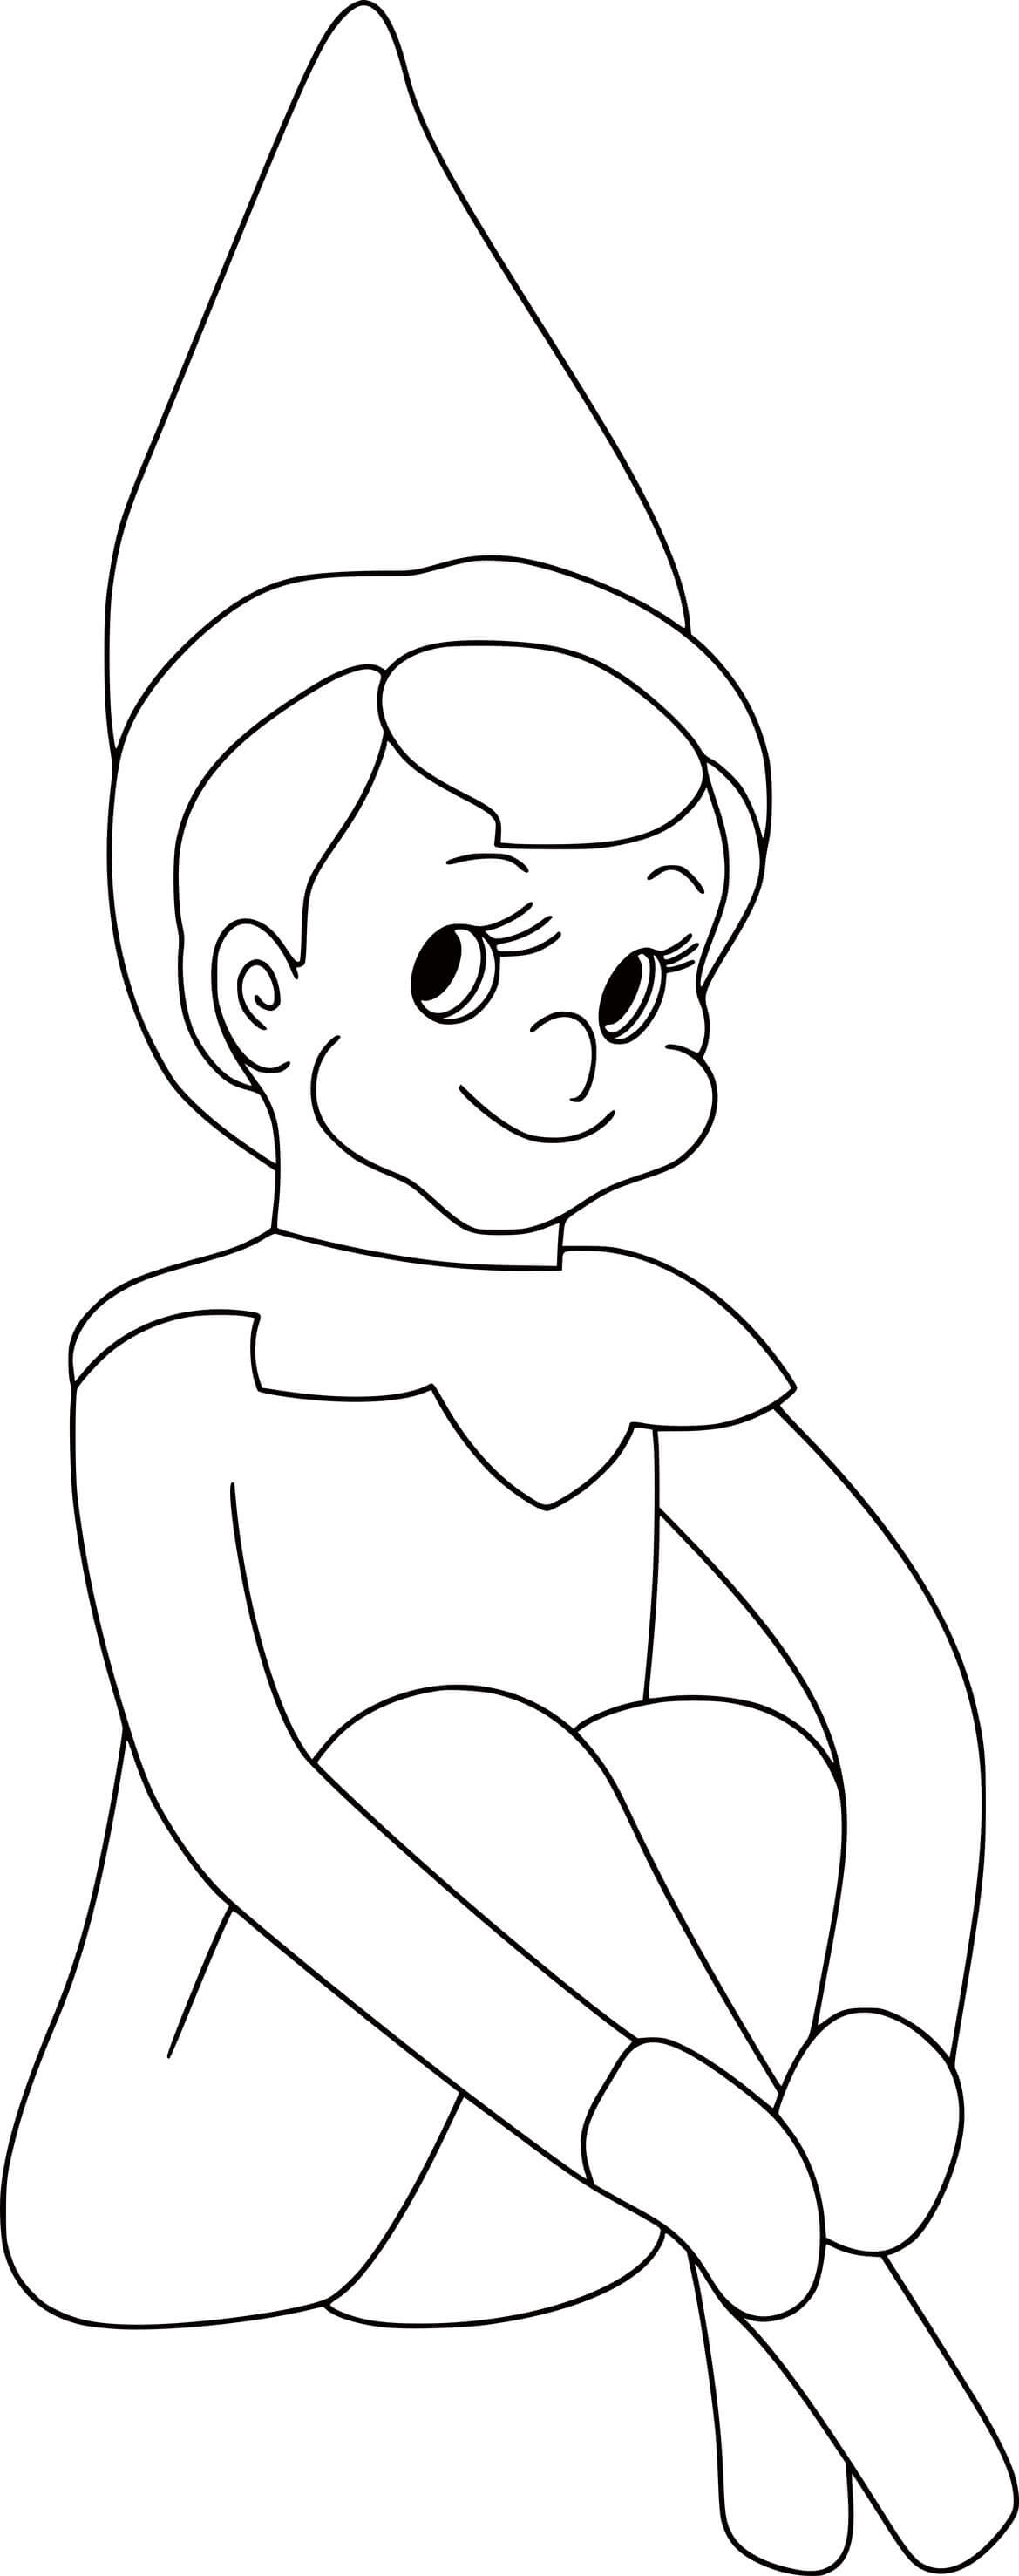 Shy Elf On The Shelf Coloring Page